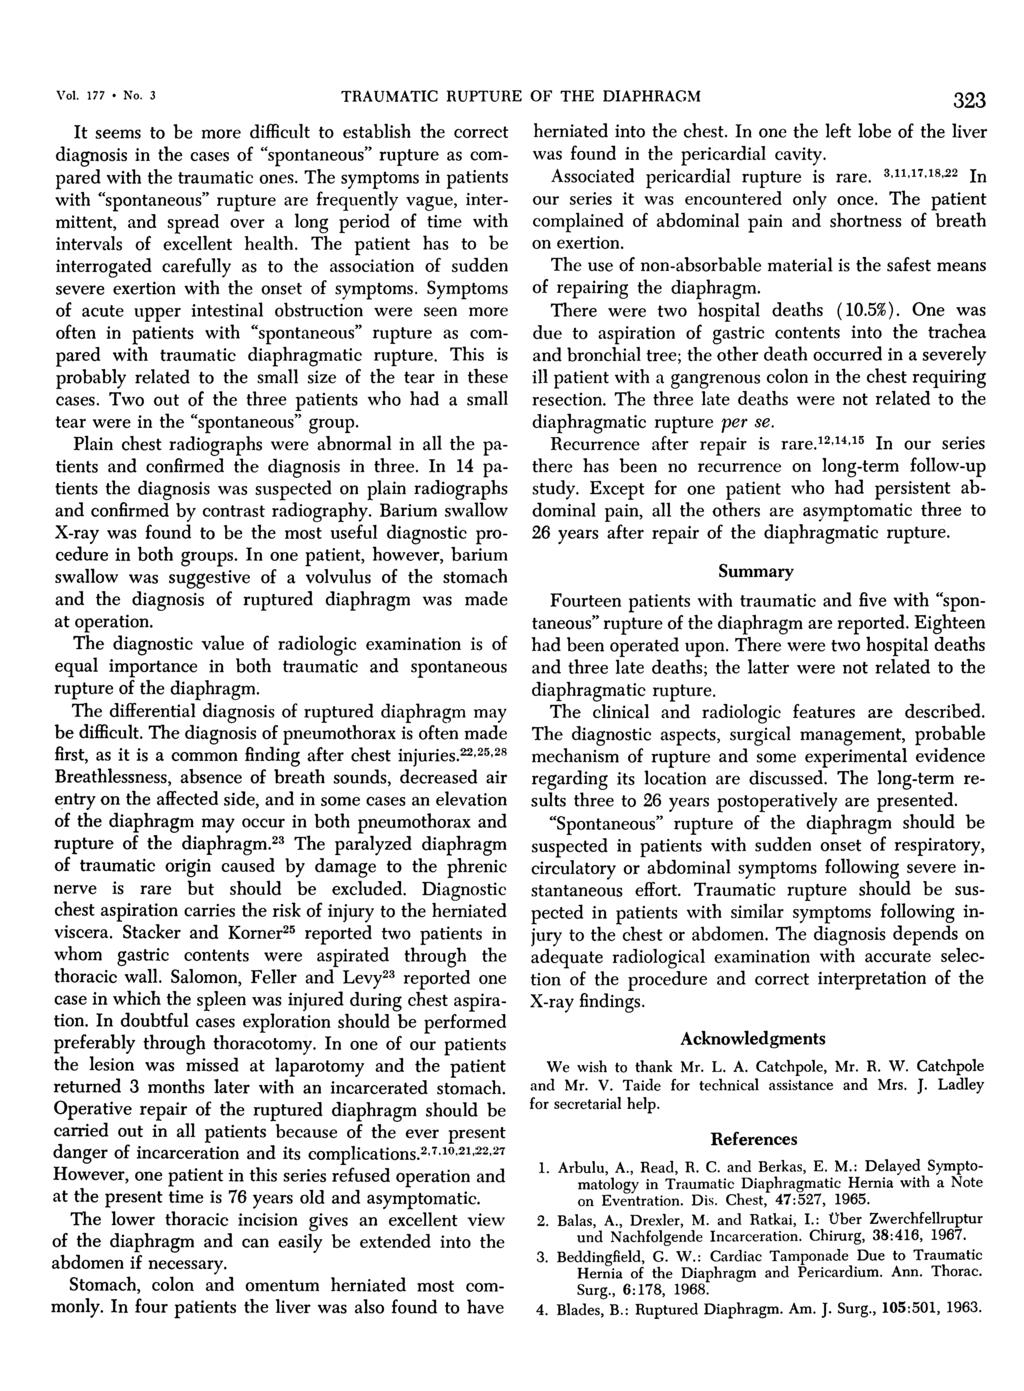 Vol. 177 * No. 3 TRAUMATIC RUPTURE OF THE DIAPHRAGM 323 It seems to be more difficult to establish the correct diagnosis in the cases of "spontaneous" rupture as compared with the traumatic ones.